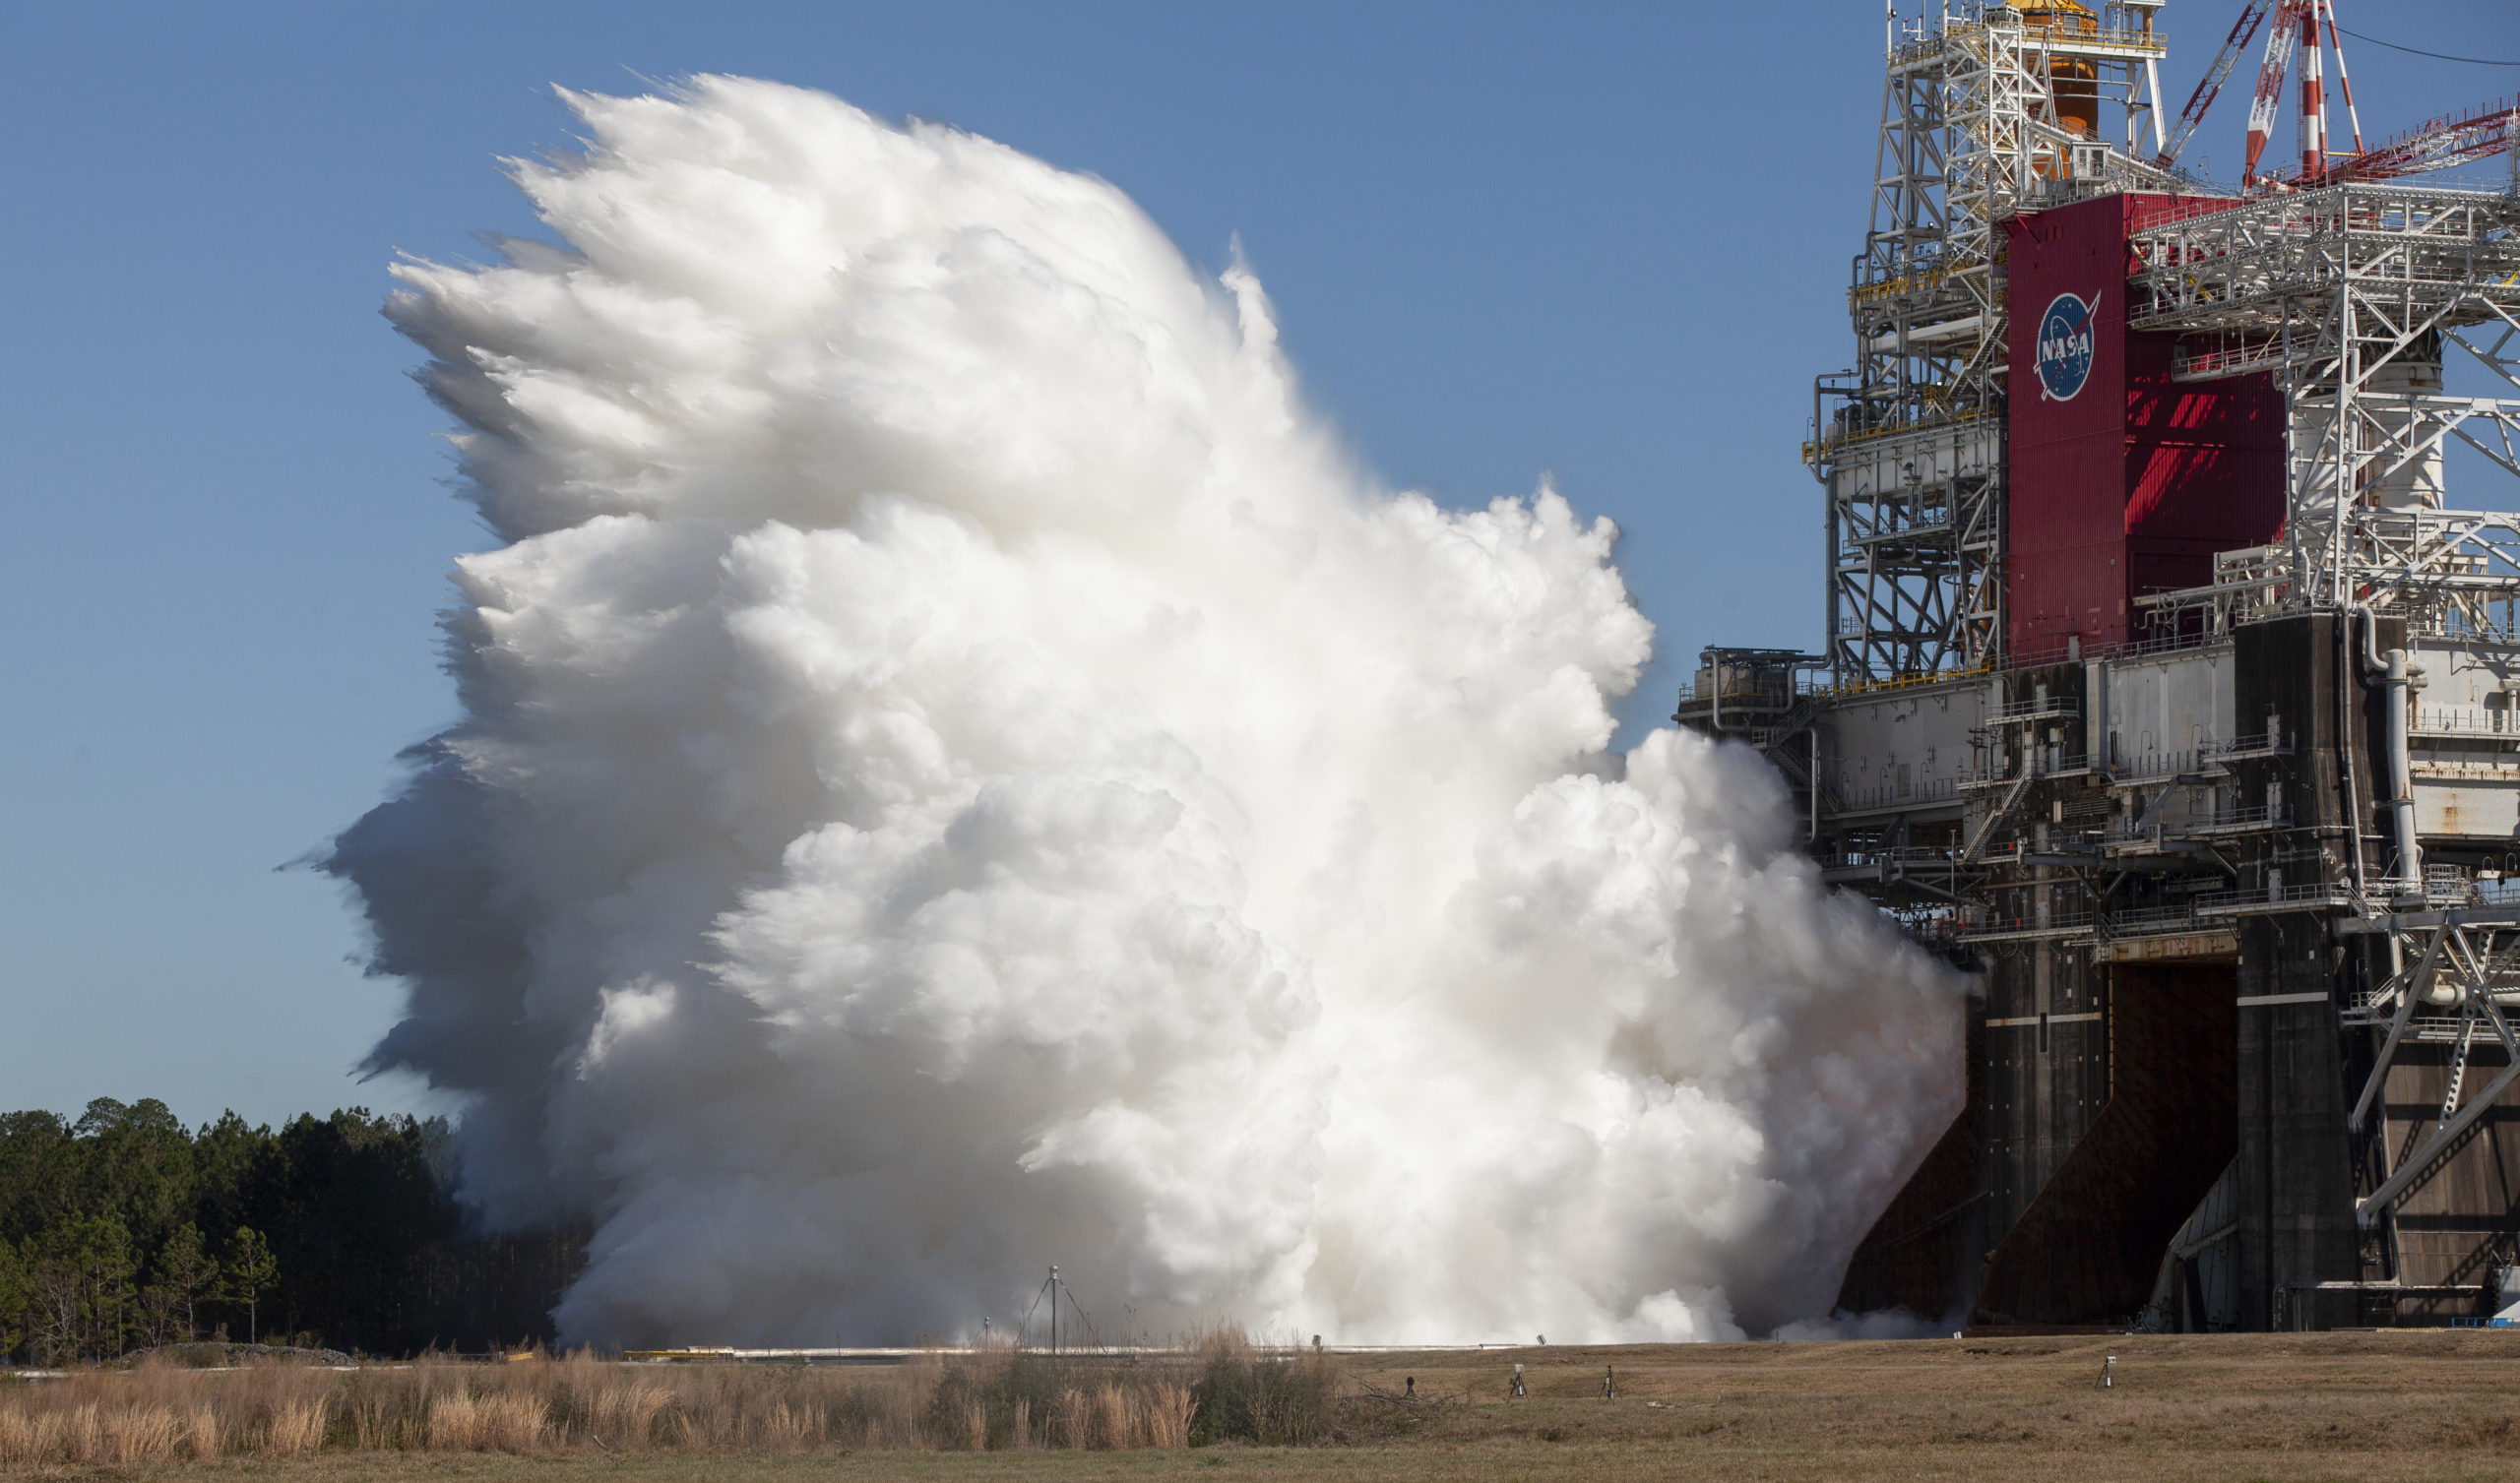 NASA Scores A+ on Successful SLS Green Run Hot Fire Test Paving Path to Artemis Moon Launch